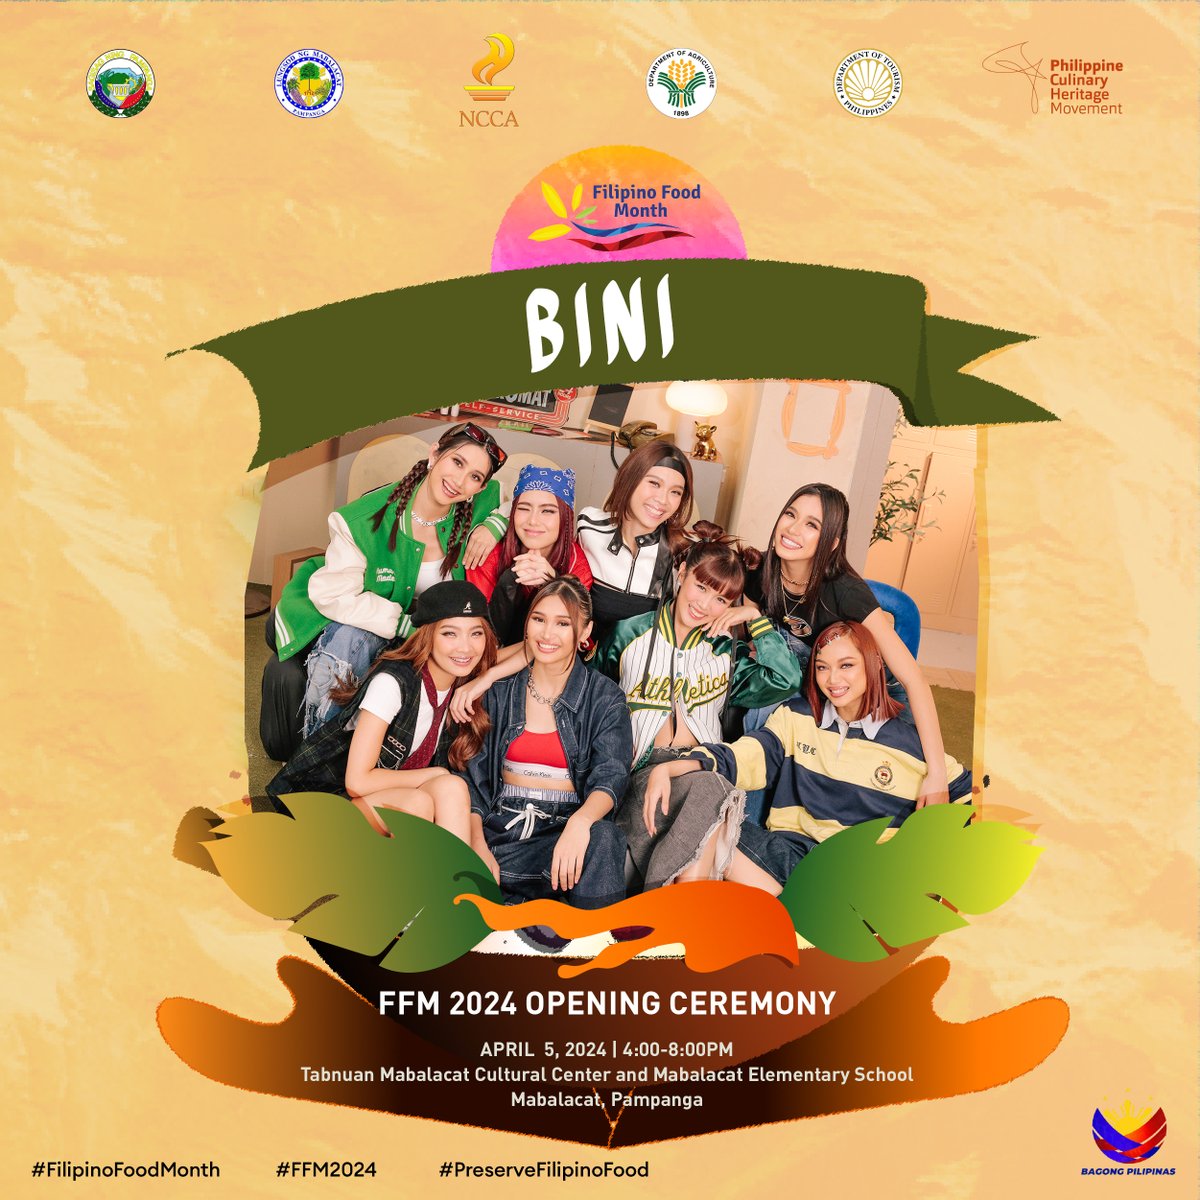 Food and music go together in Filipino celebrations and there is no better way to open the FFM than to sing, dance, and feast with no less than @BINI_ph! See you in Pampanga, Blooms! #BINIxFFM2024 #PreserveFilipinoFood The show is free and open to the public.